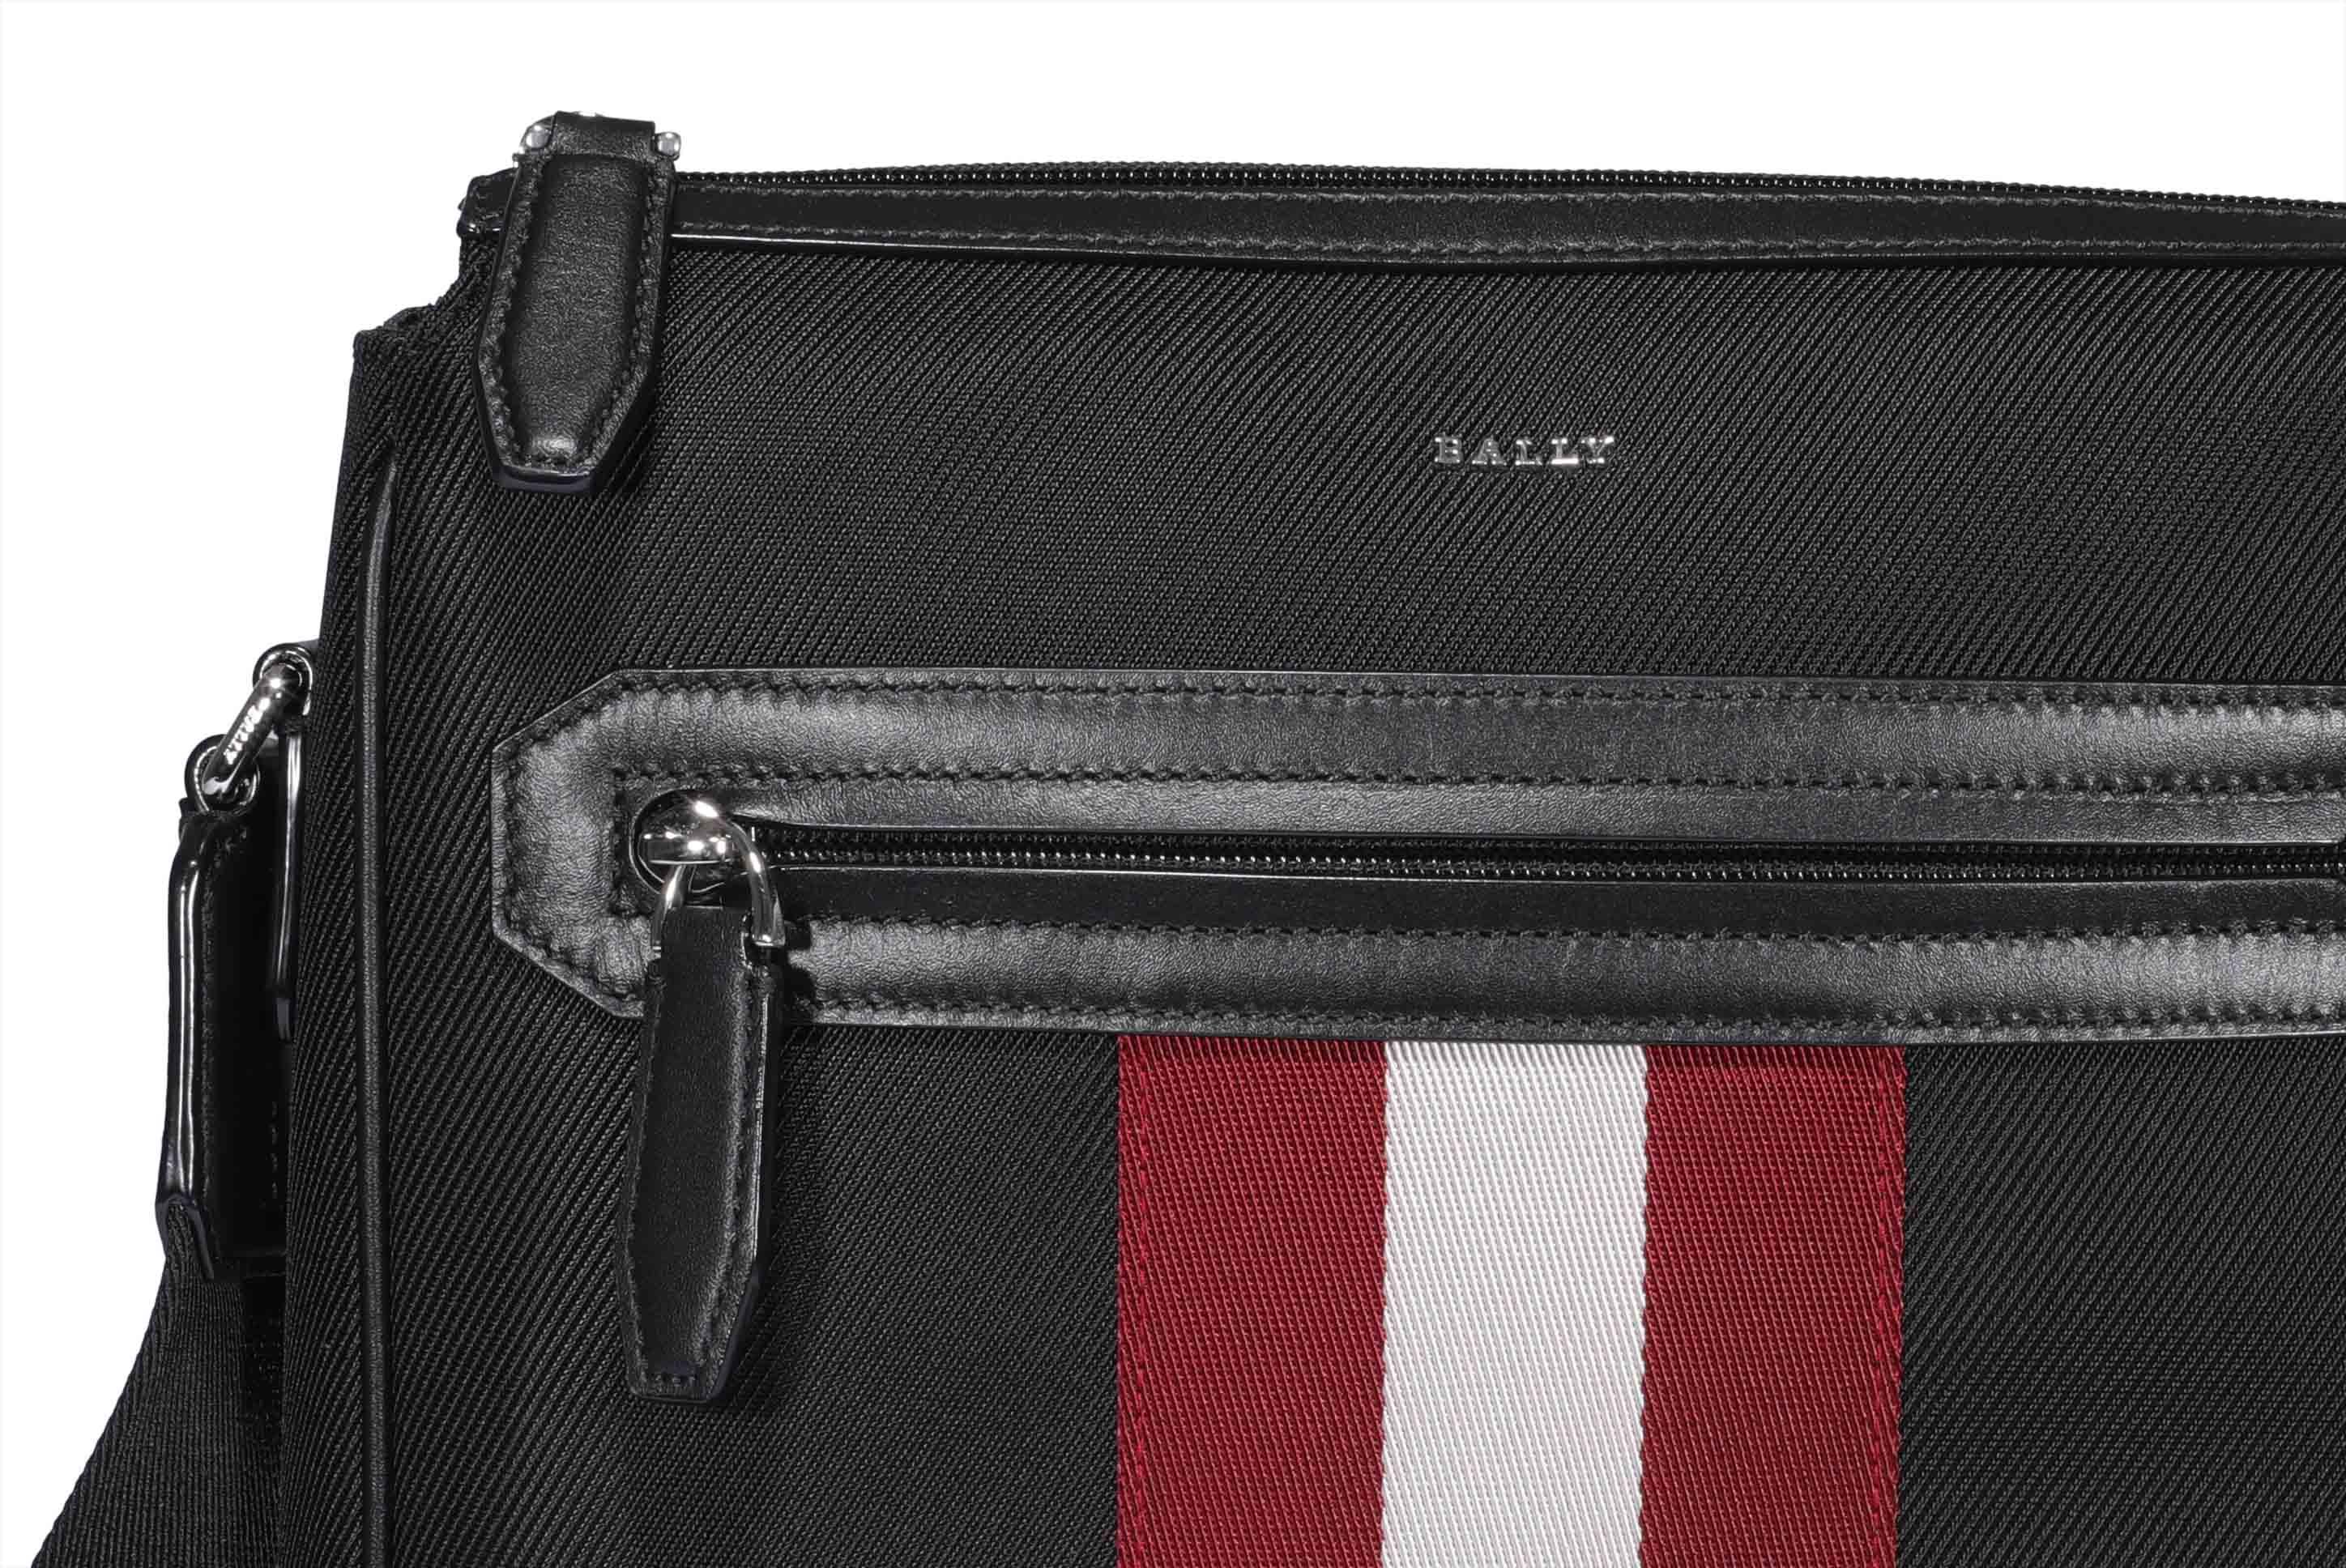 Bally Currios Striped Band Messenger Bag in Black for Men - Save 60% - Lyst